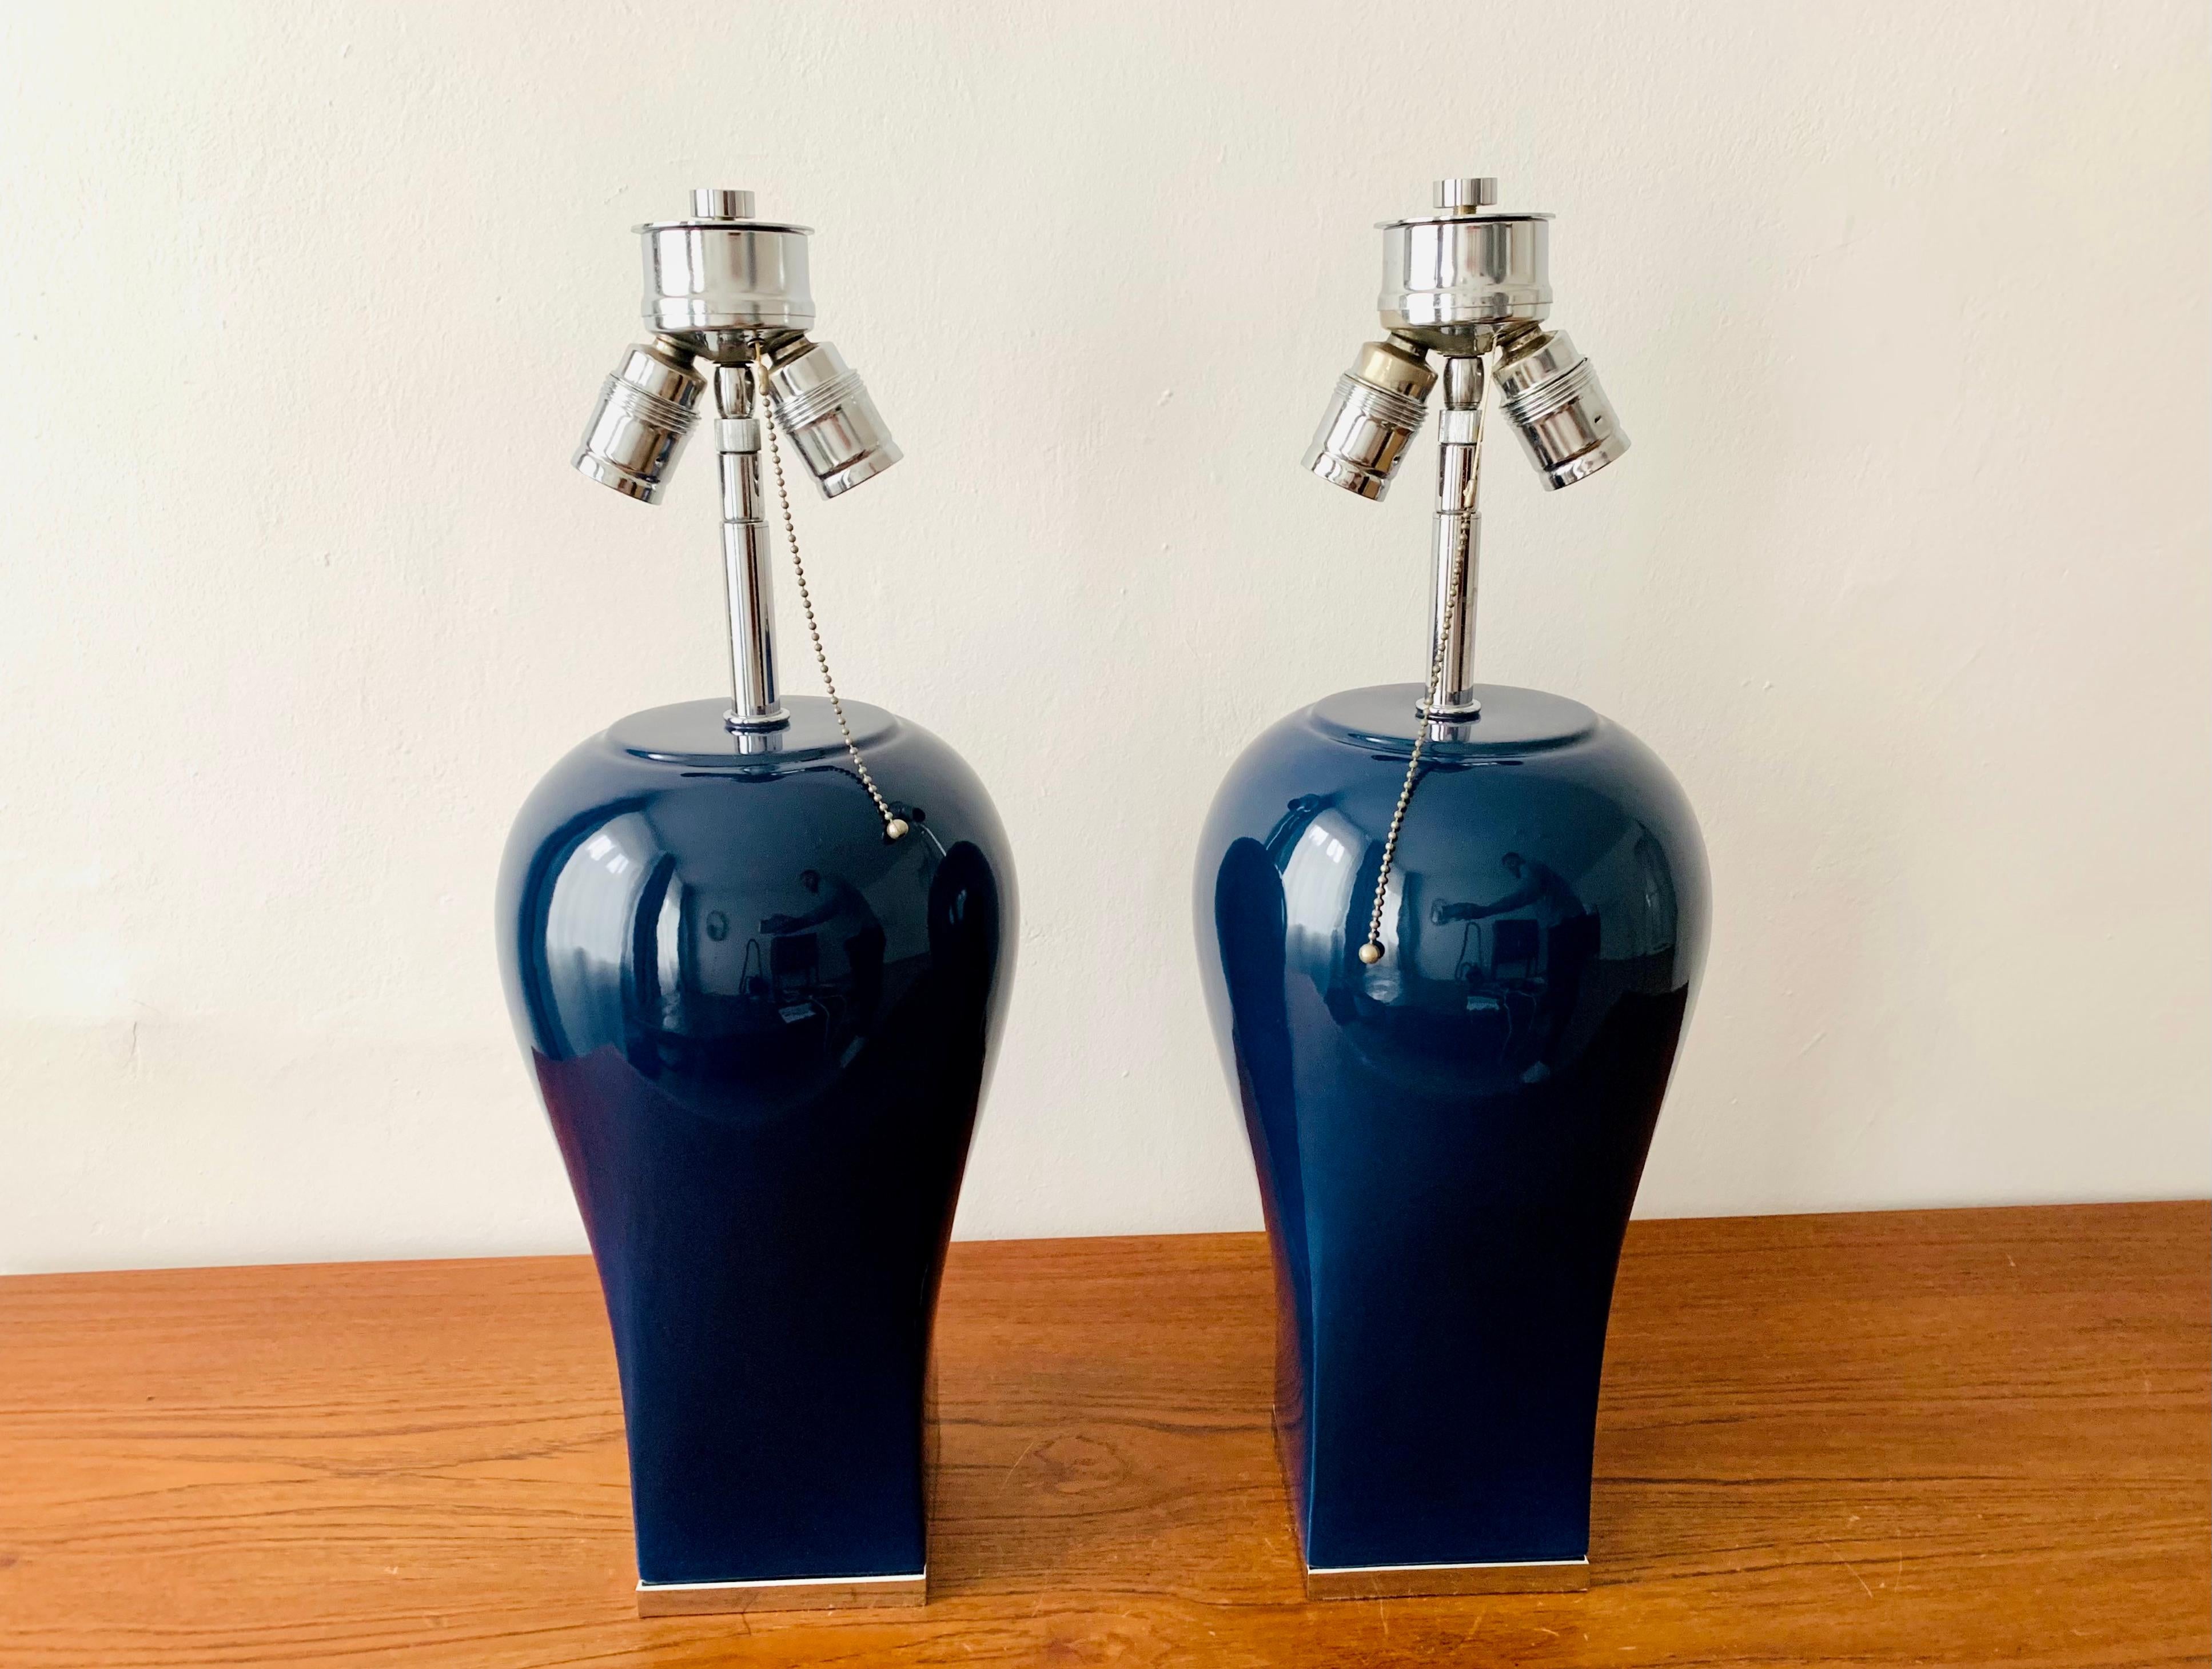 Wonderful ceramic table lamps from the 1960s.
Extremely high-quality workmanship and very beautiful, elegant design.
The upper part is height adjustable.

The lampshade is only an example and is not included in the offer.

Condition:

Very good